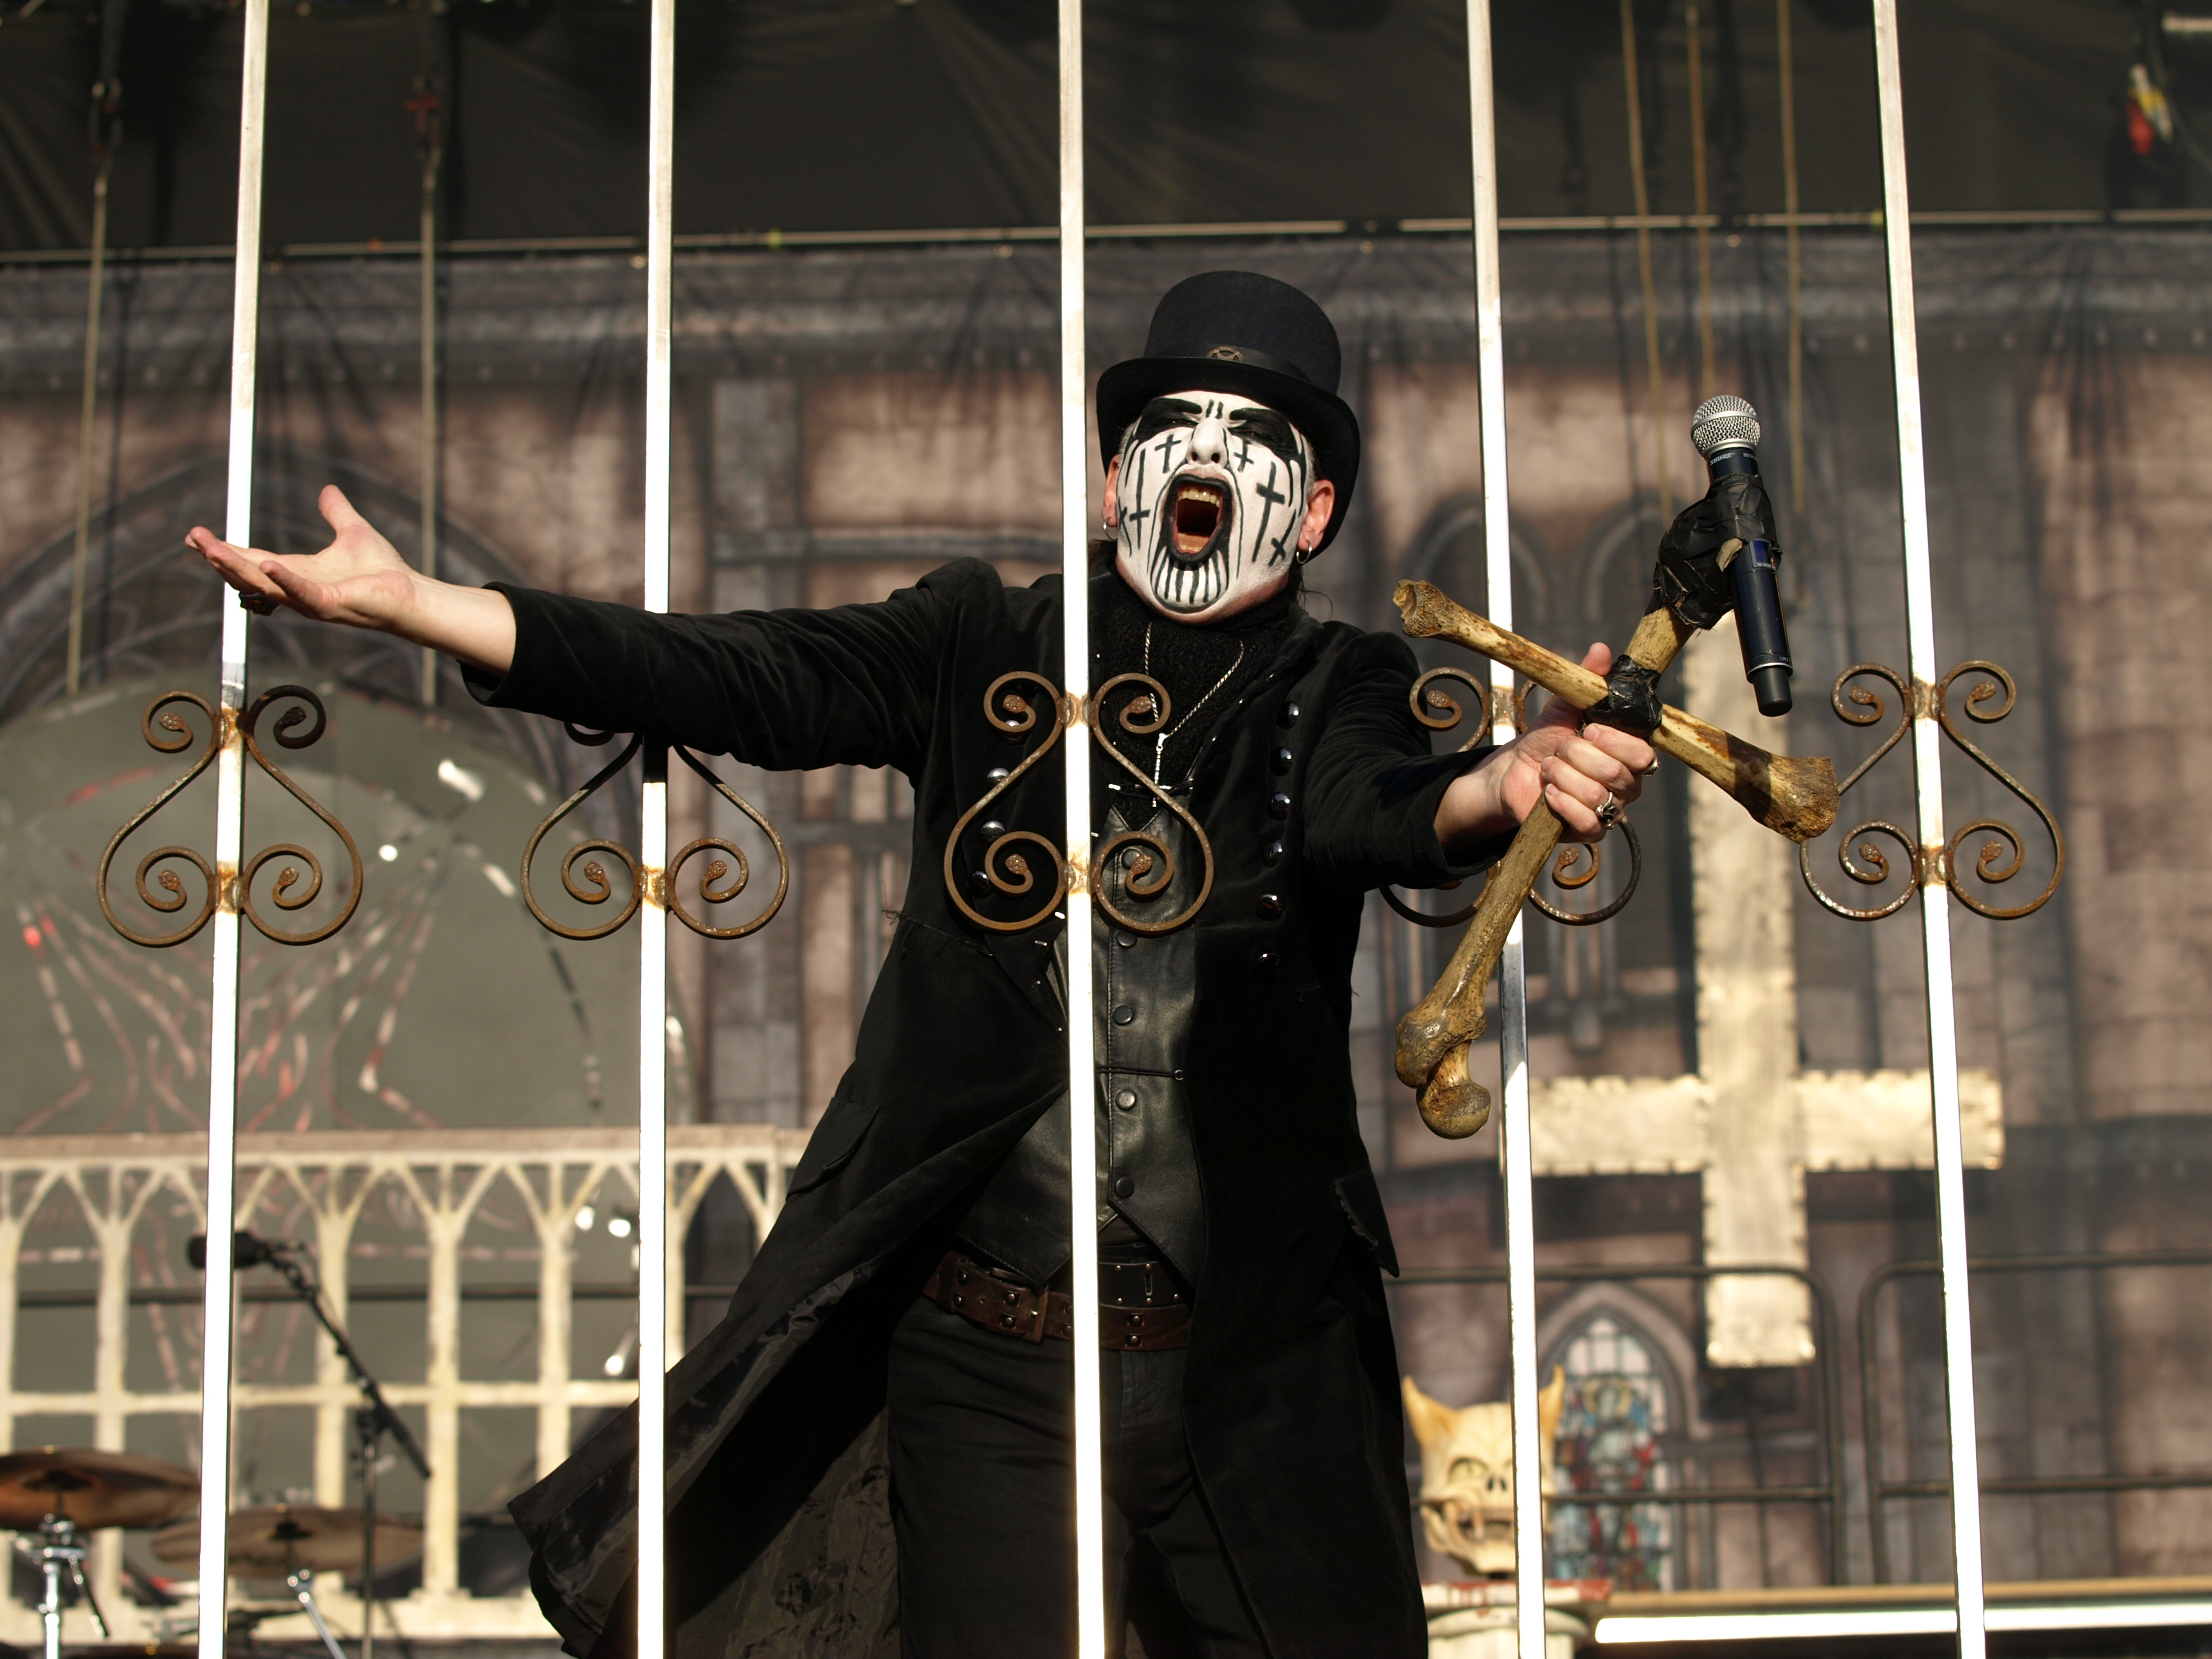 Amazing King Diamond Pictures & Backgrounds